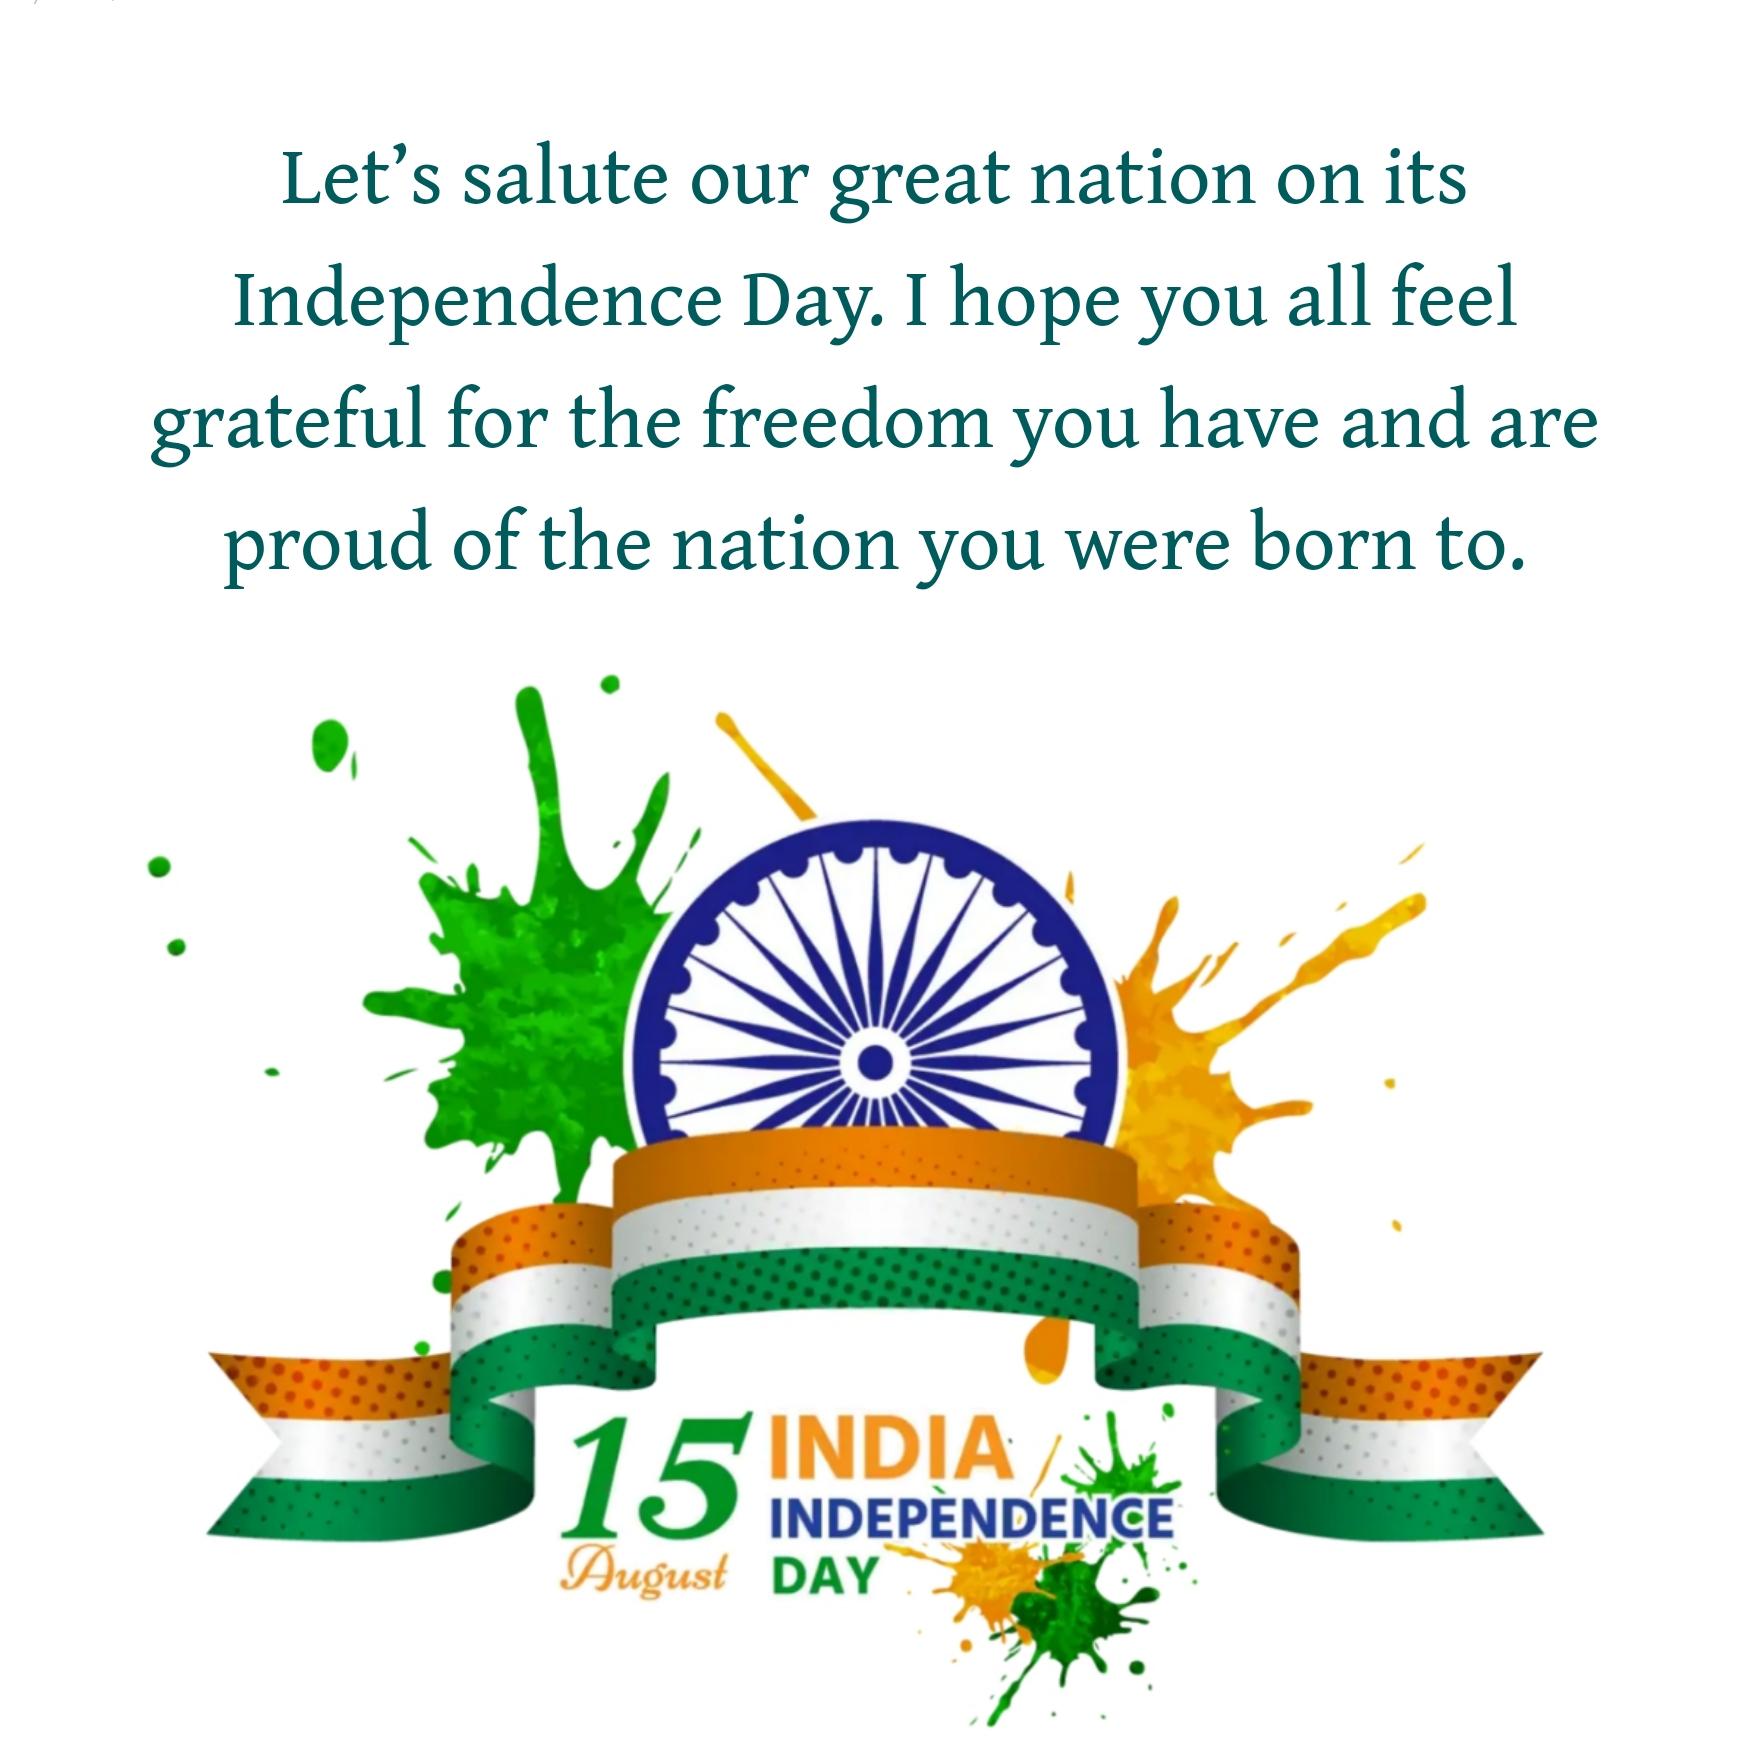 Lets salute our great nation on its Independence Day